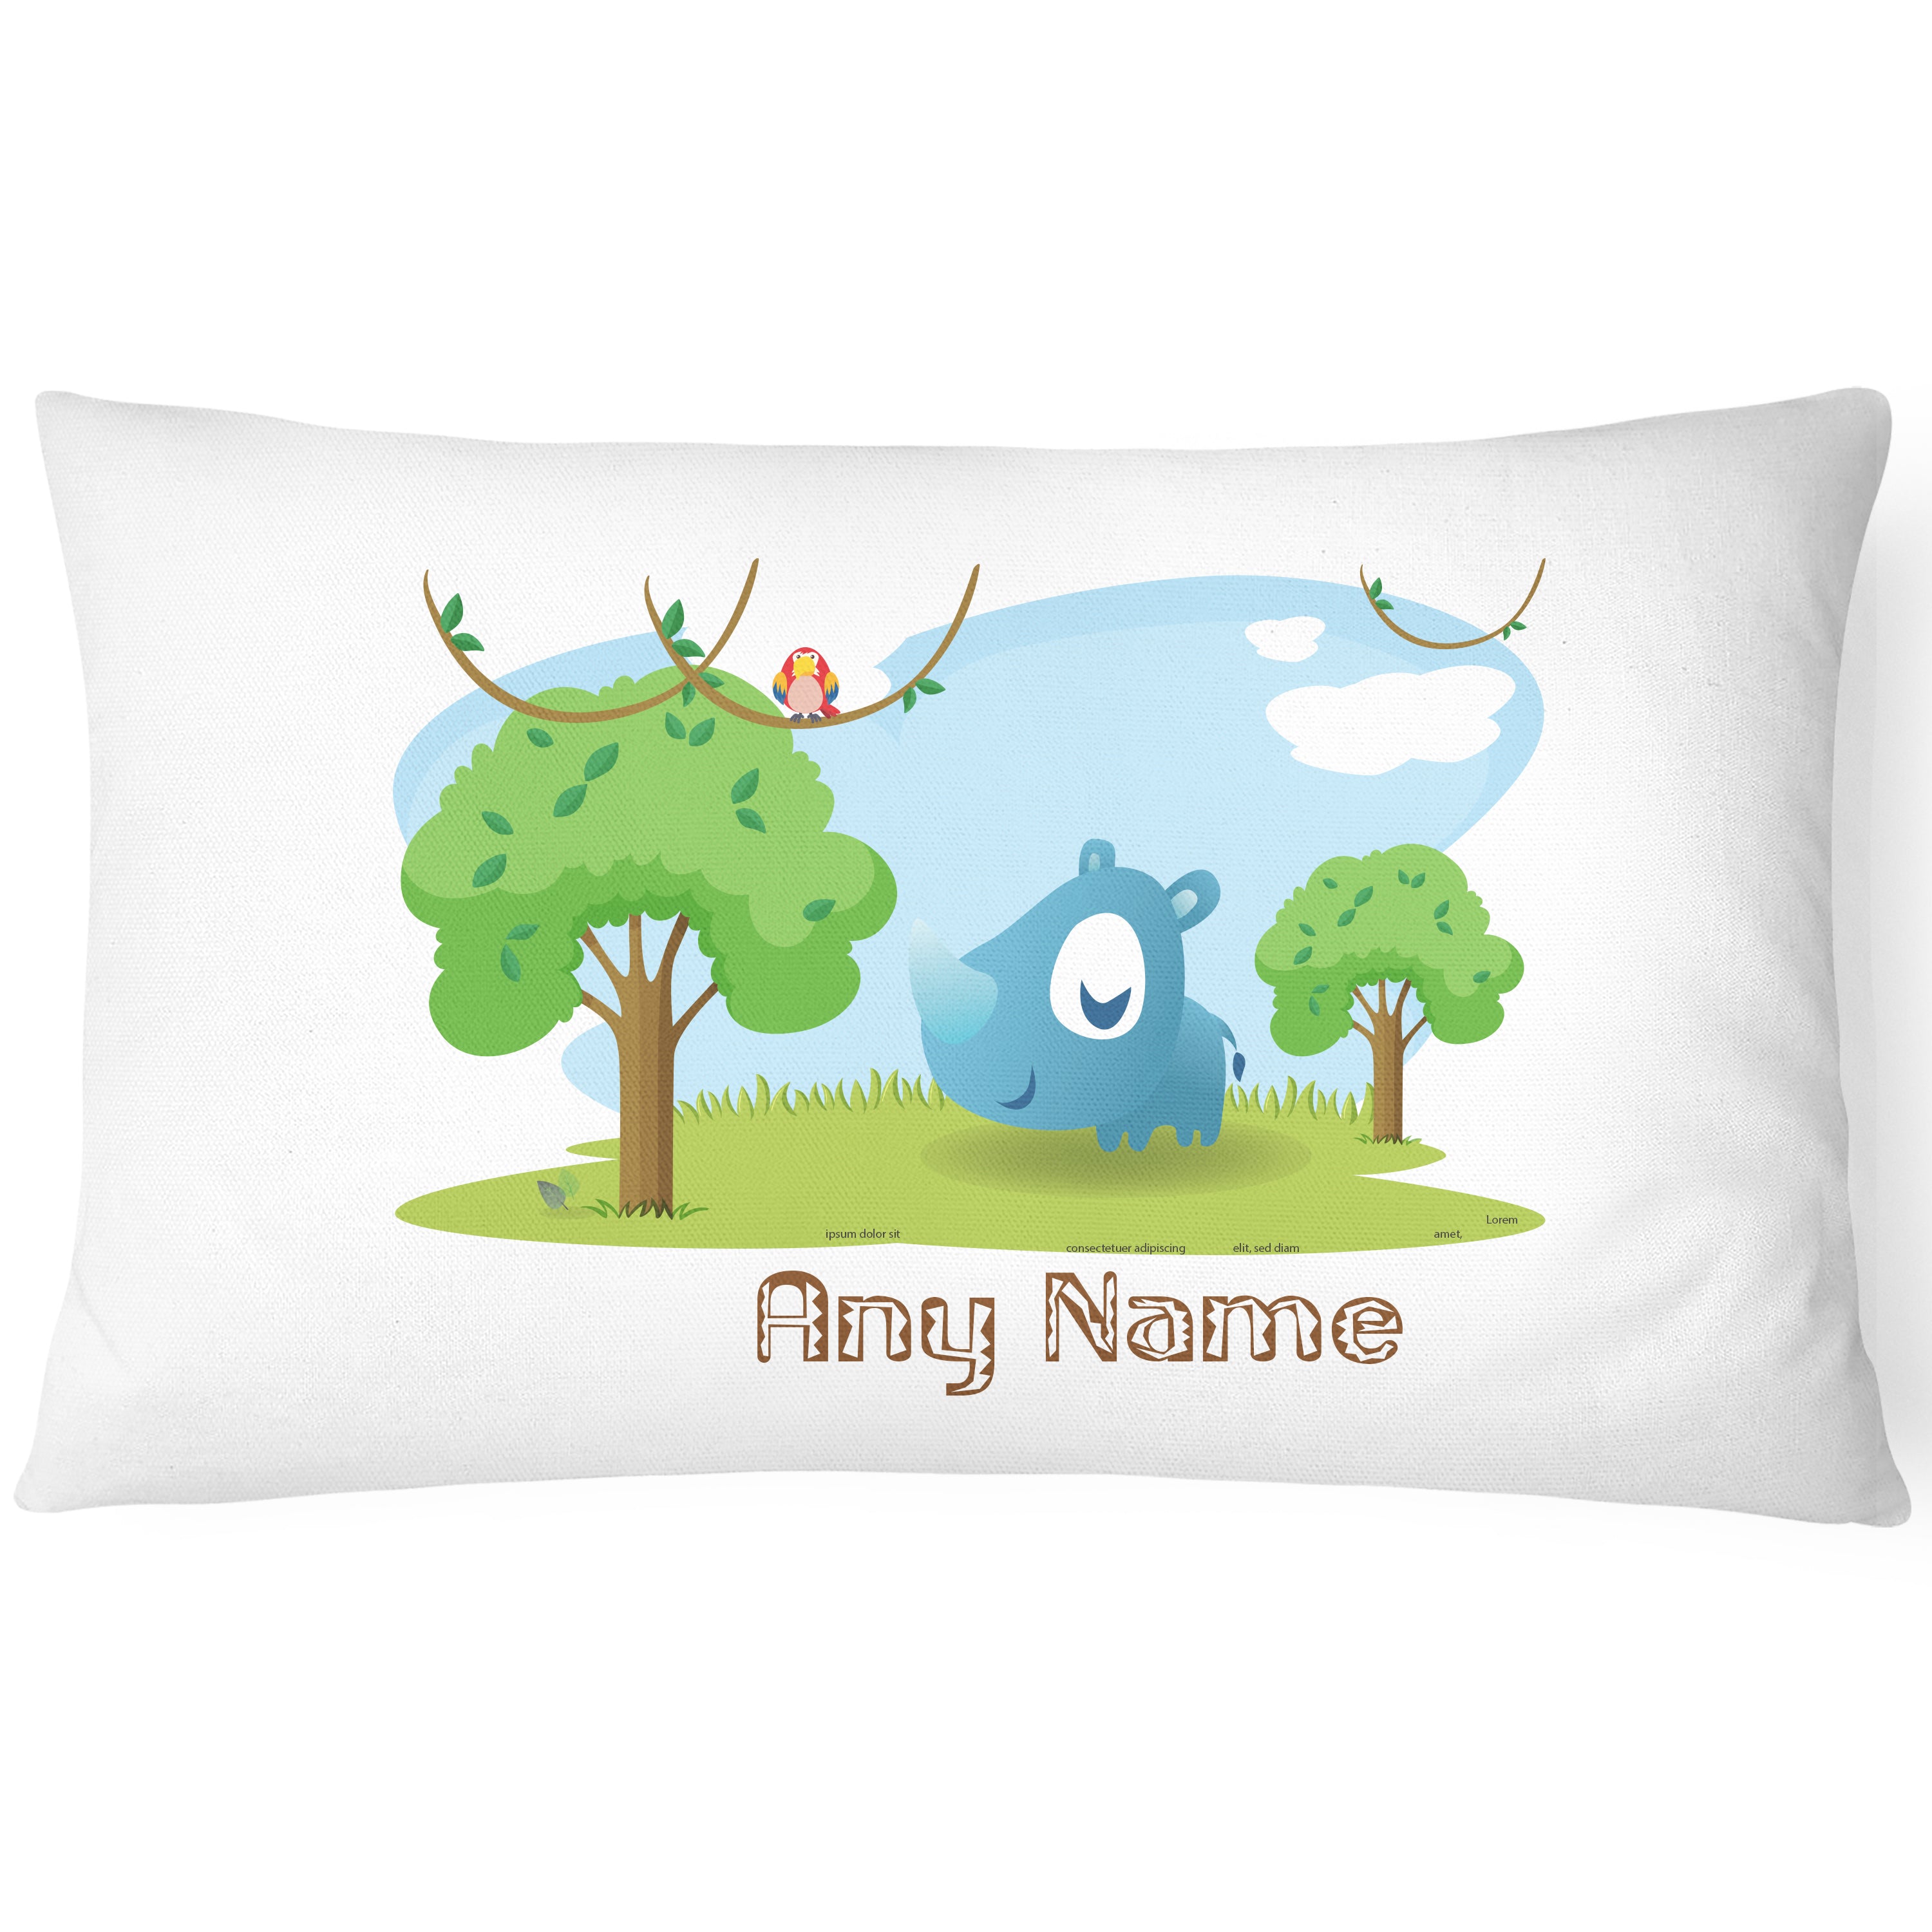 Cute Animal Zoo - Children's Pillowcase - Personalise with Any Name - Rhino